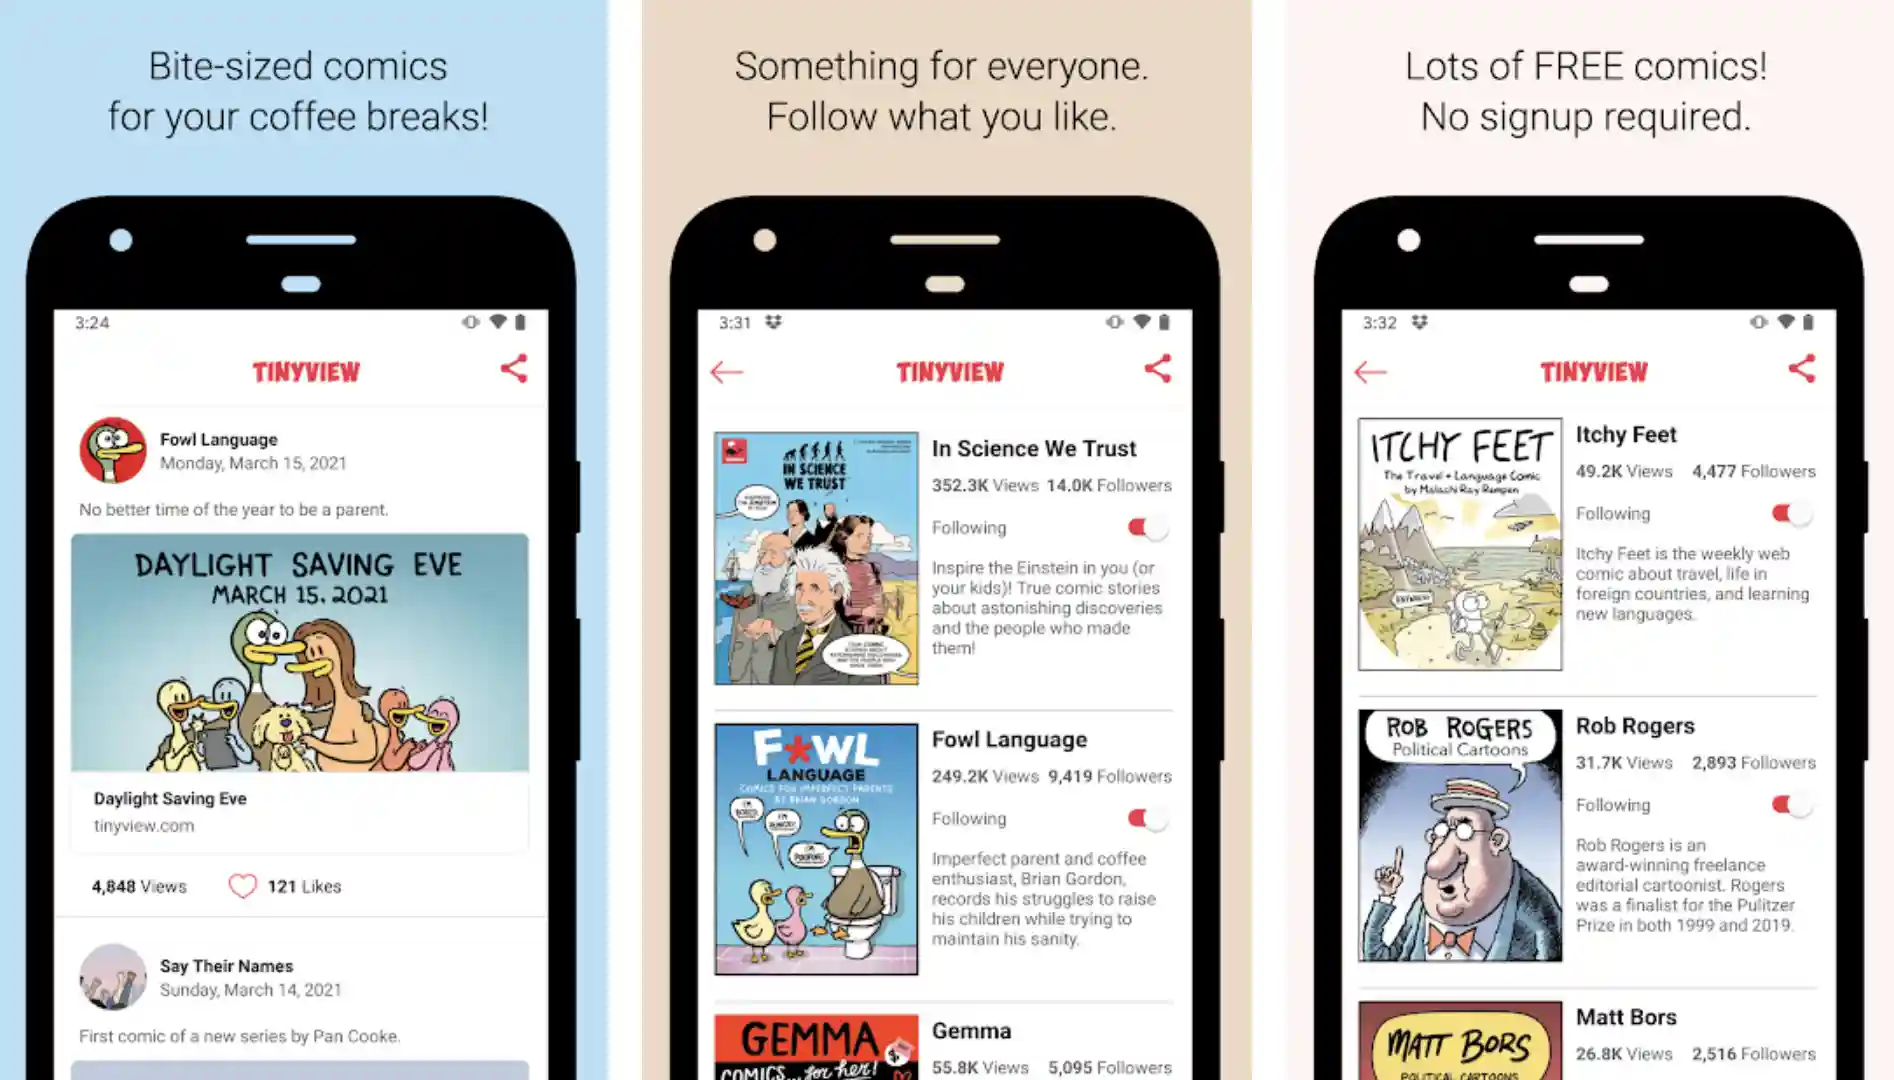 15 Best Apps Like Webtoon To Discover New Stories